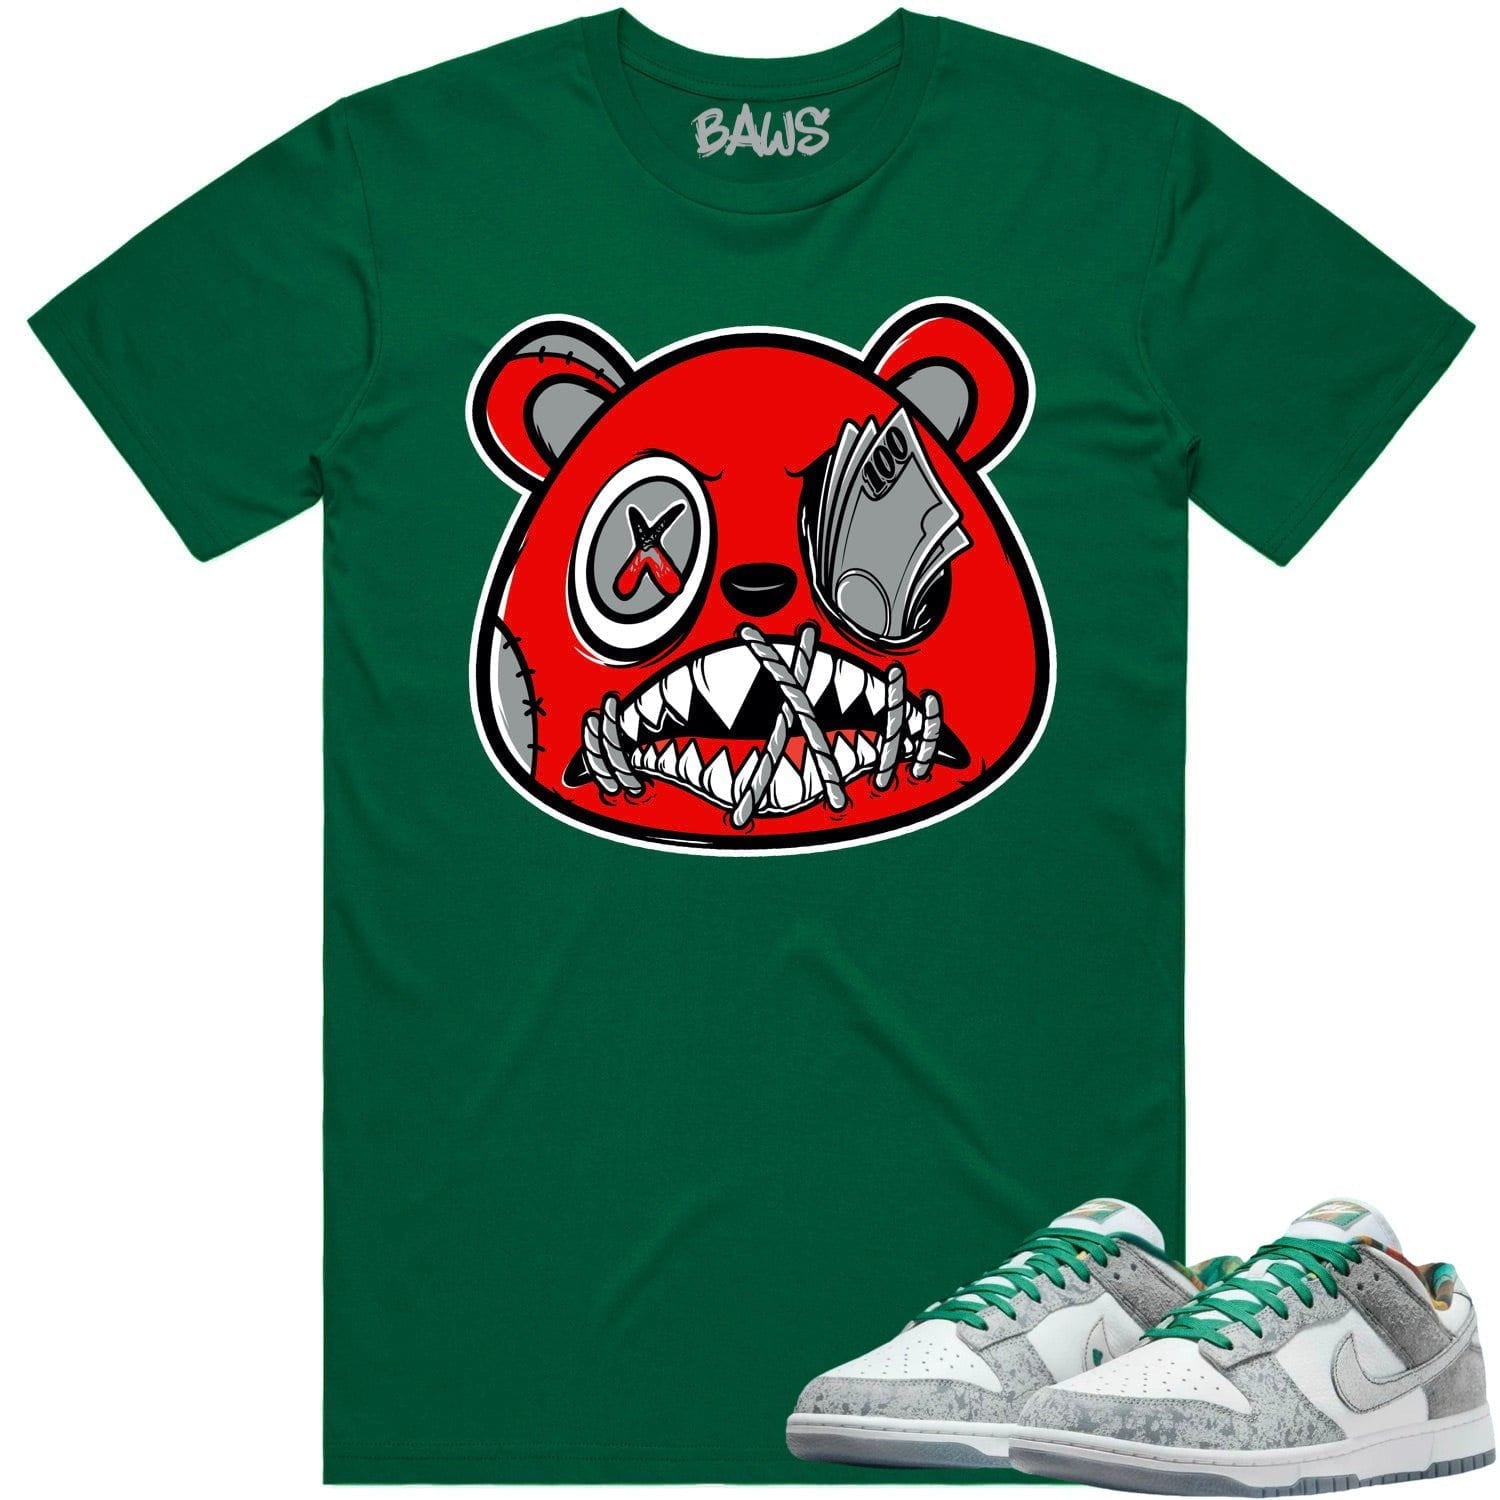 Philly Dunks Shirt - Dunks Sneaker Tees -Angry Money Talks Baws